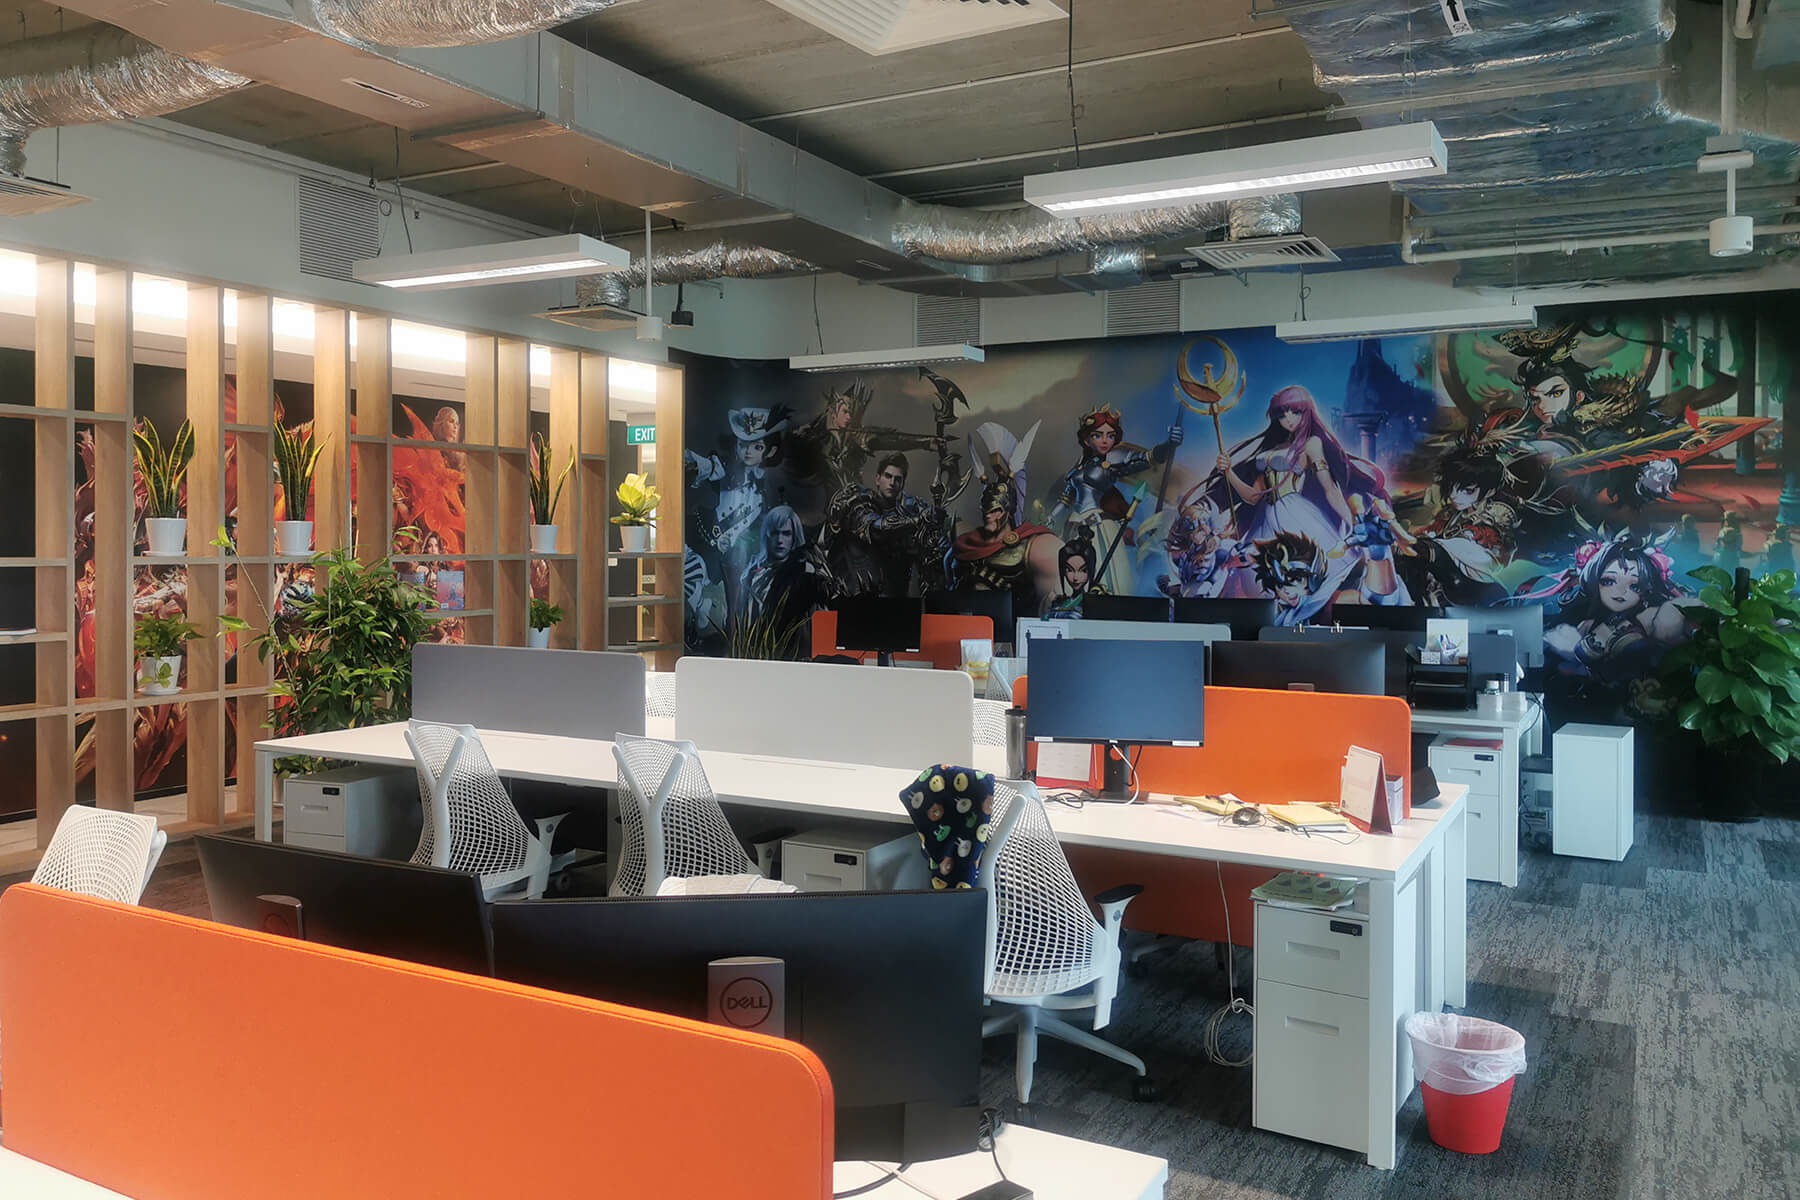 Picture of the Yoozo Games work area, featuring a colorful mural of game characters